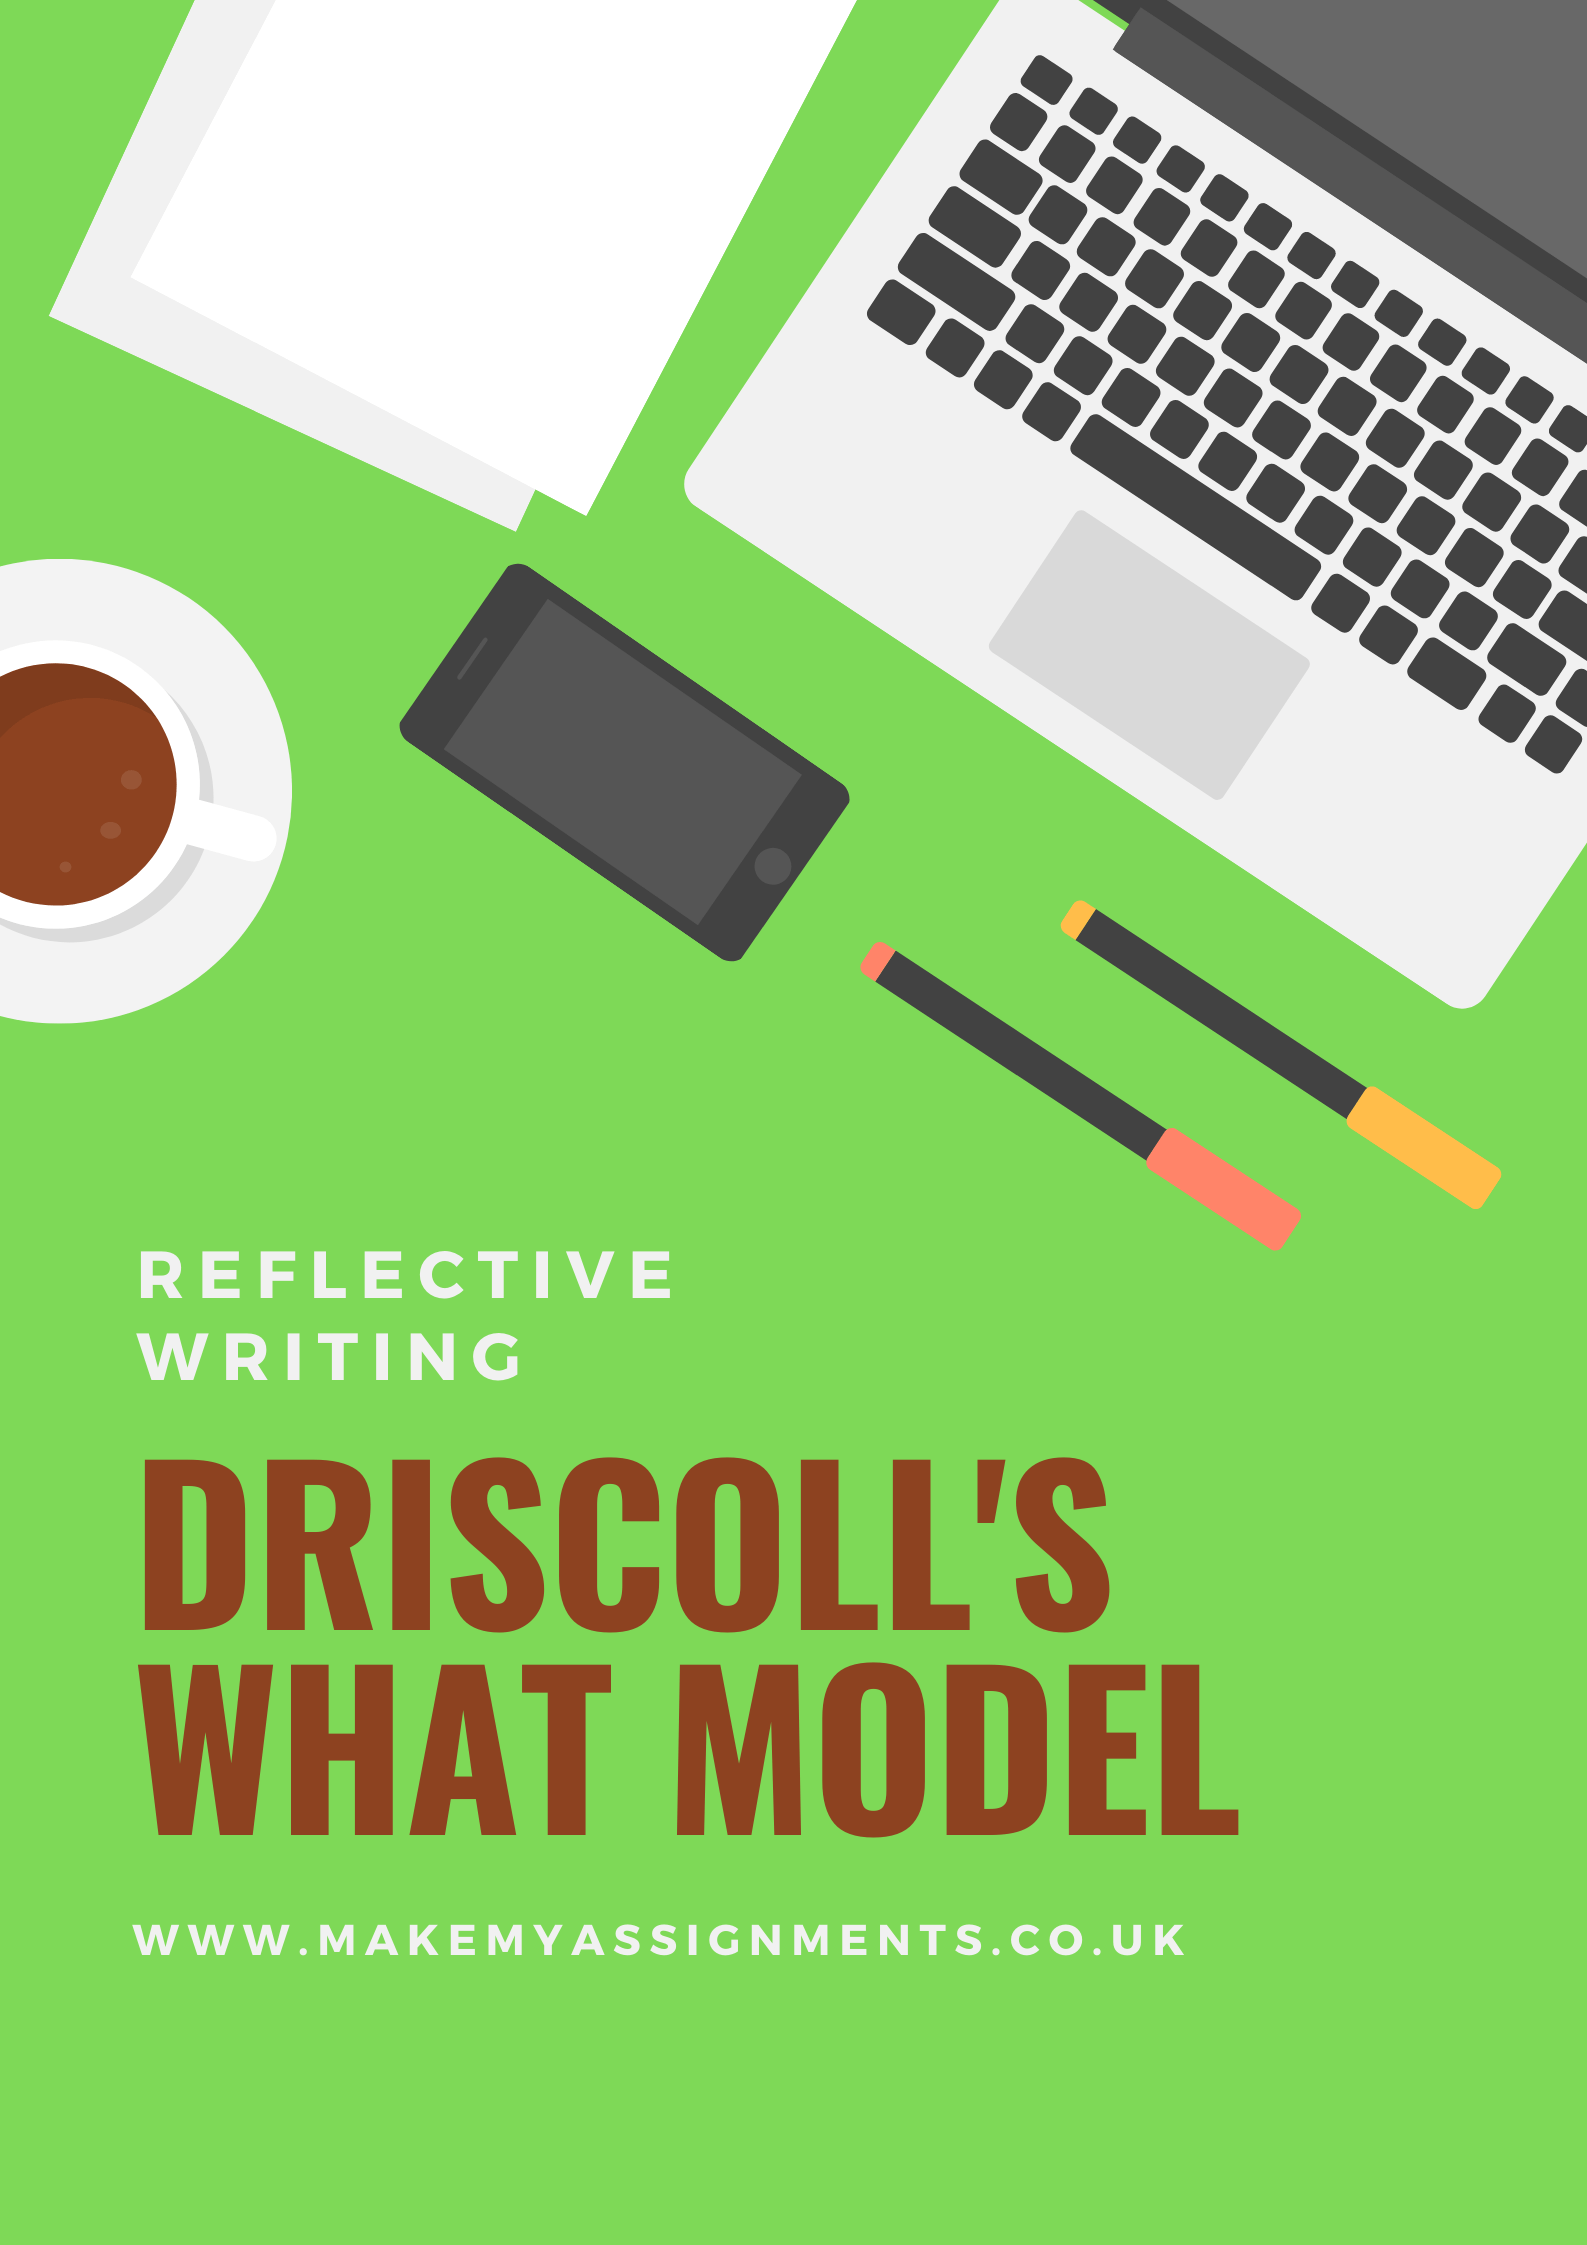 Driscoll's Model of Reflection